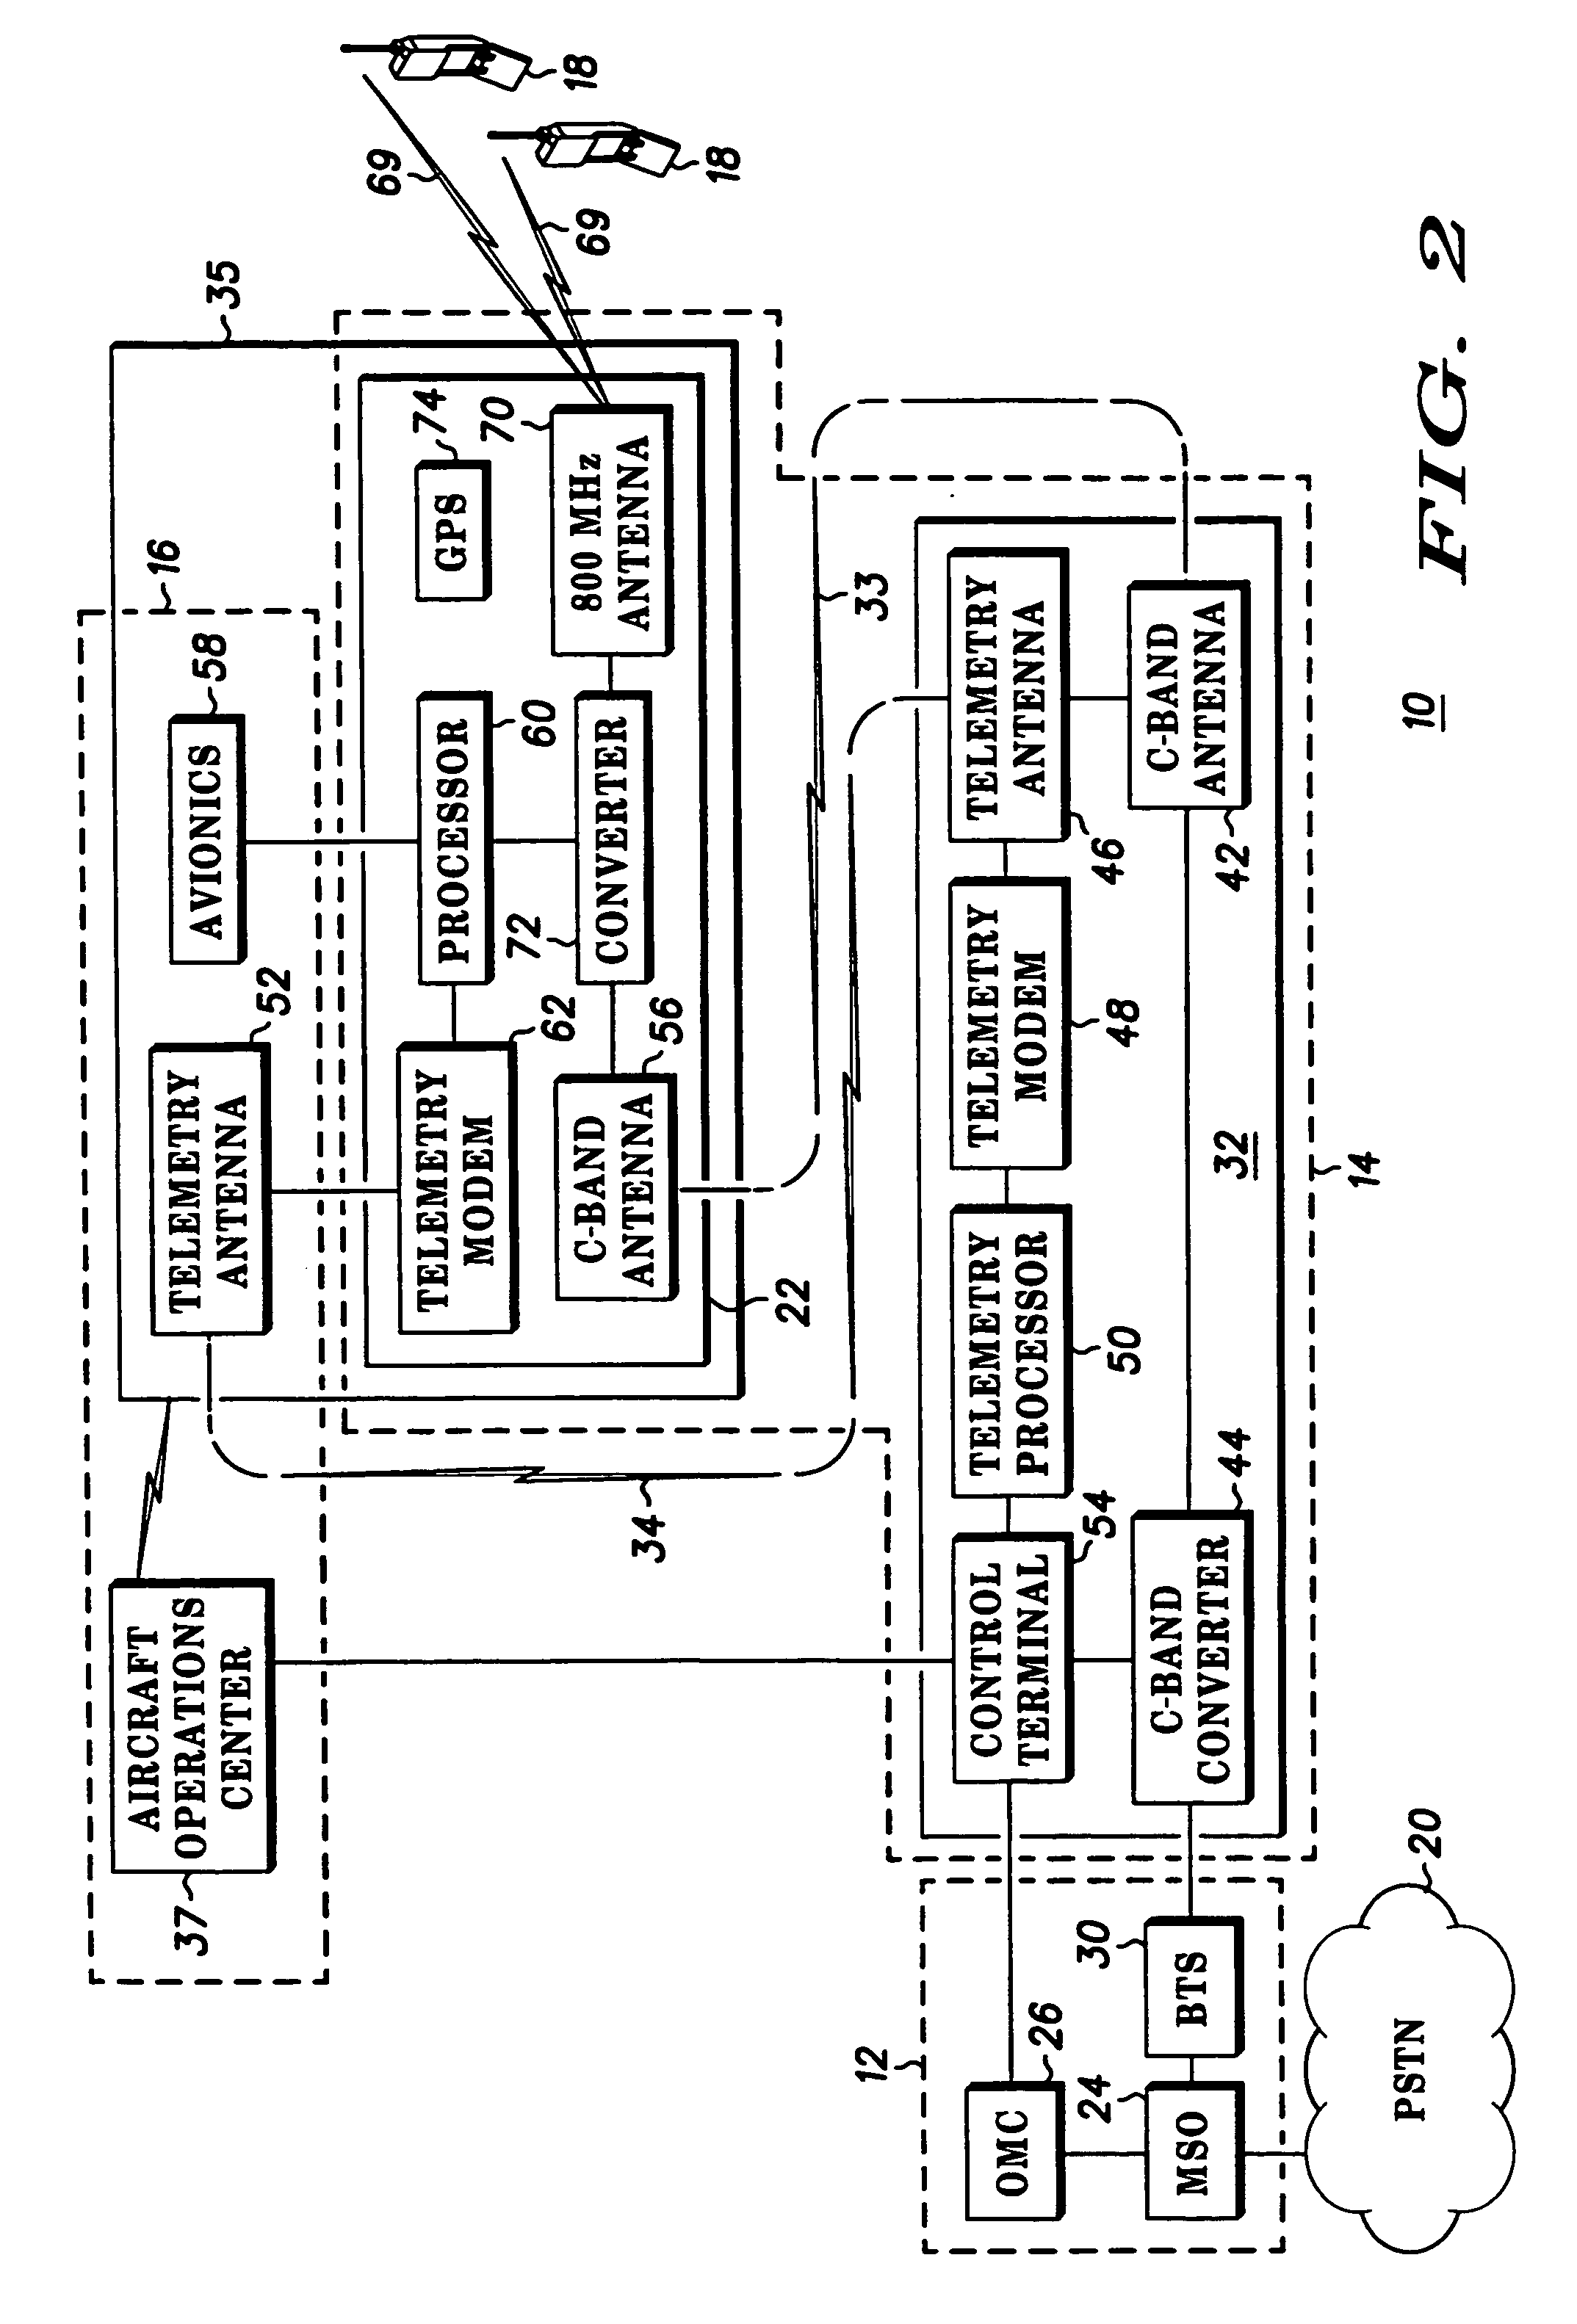 Multi-airplane cellular communications system